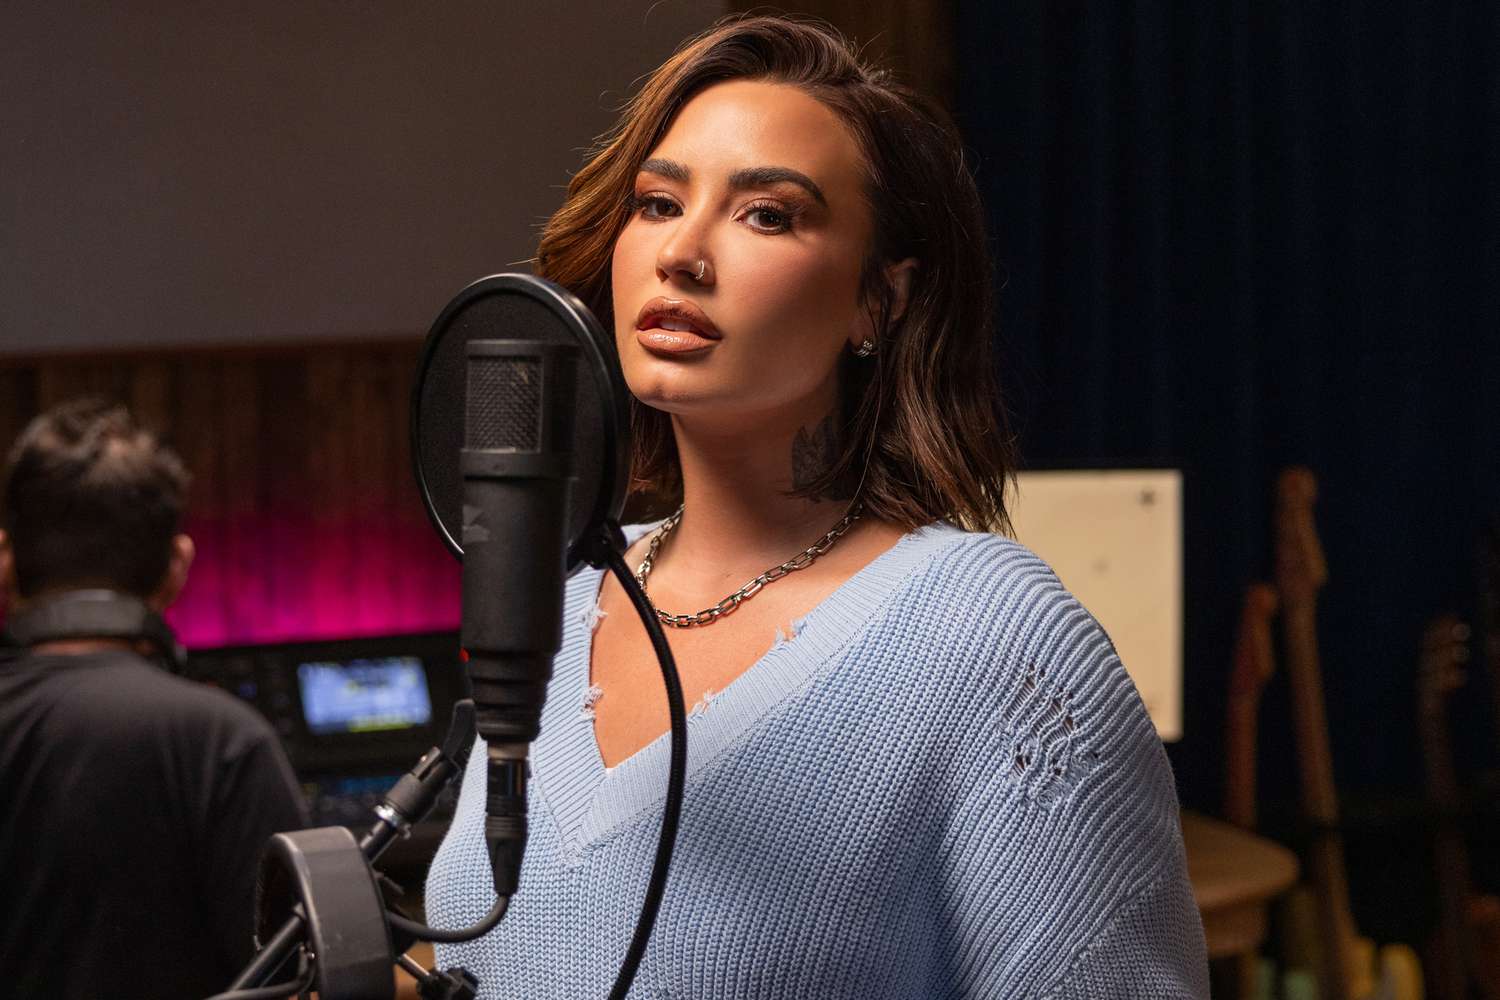 Demi Lovato Collabs with OGX on a Song for Your Summer Playlist: 'It's About Feeling Yourself' (Exclusive)